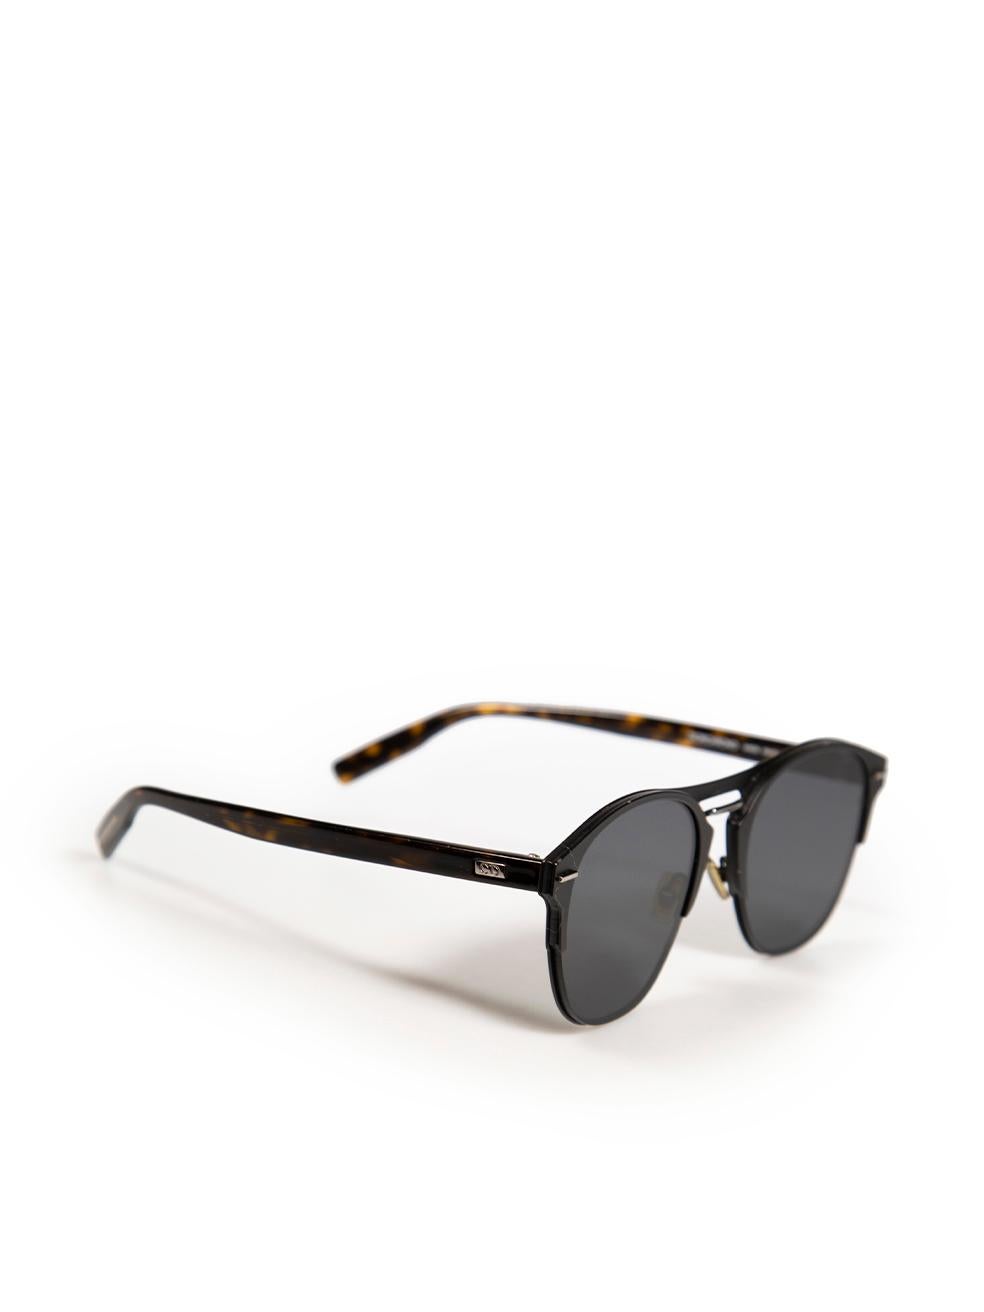 CONDITION is Very good. Minimal wear to sunglasses is evident. Minimal wear to top of lenses metal frame where coating is scratched on this used Dior designer resale item.
 
 Details
 Diorchrono 
 Black
 Metal
 Sunglasses
 Round frame
 Tortoiseshell